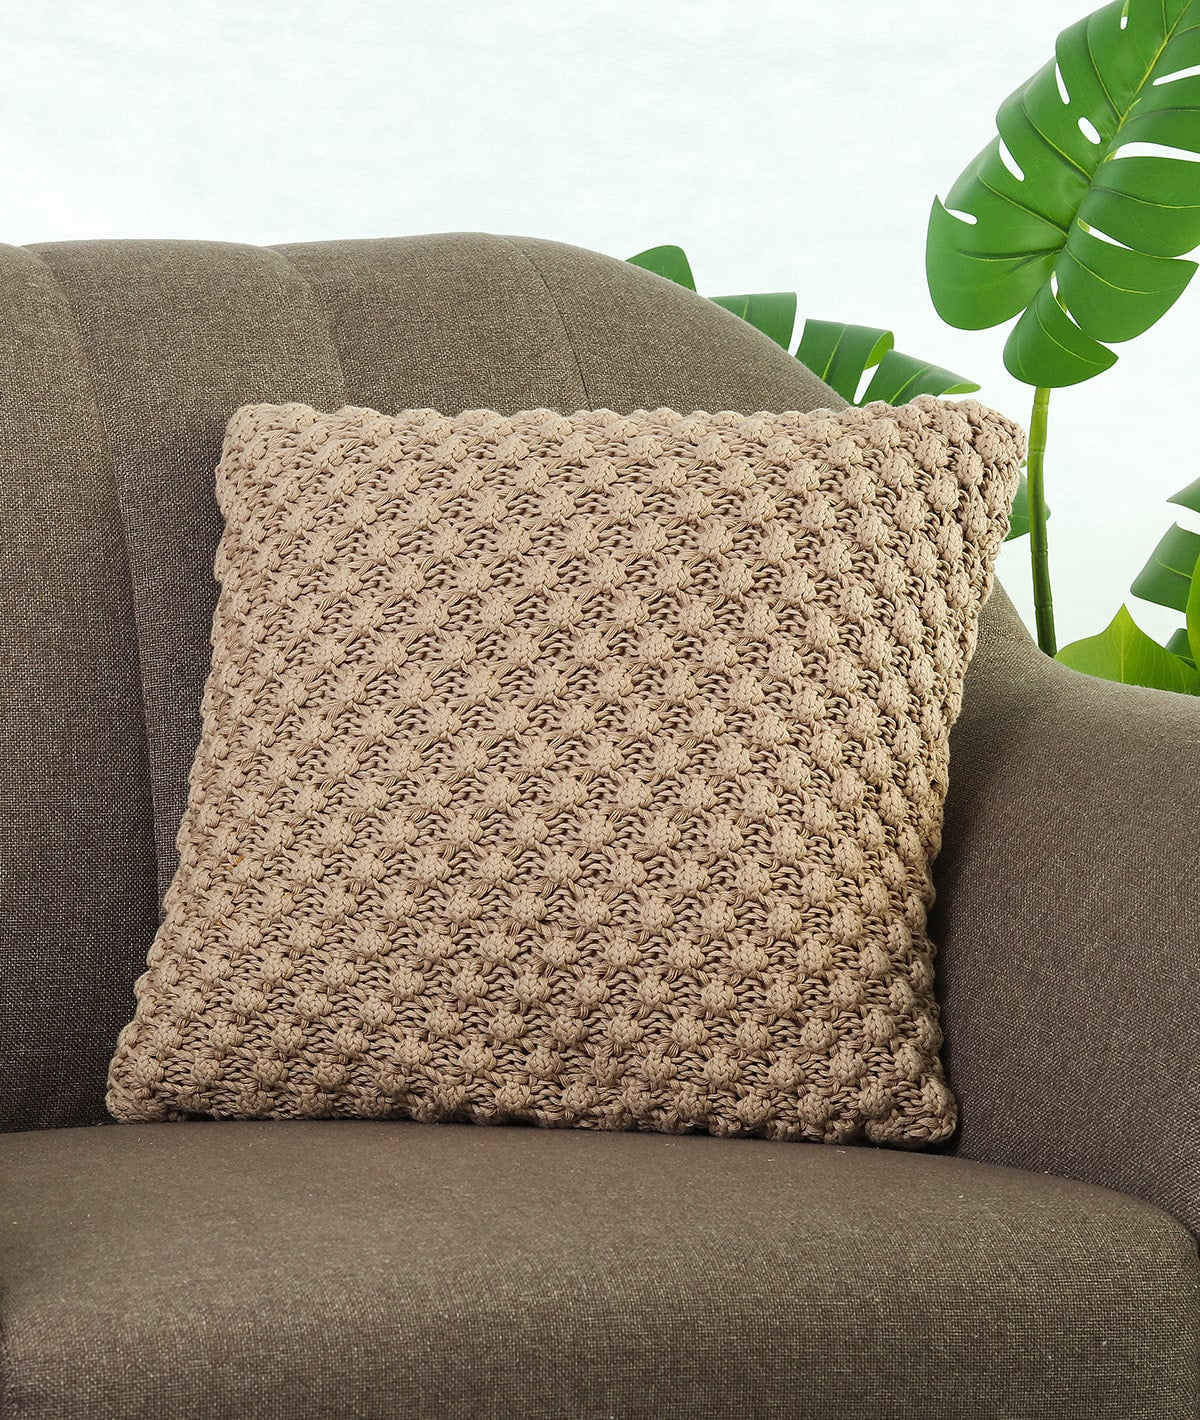 Popcorn Knit Light Beige Melange Cotton Knitted Decorative 16 X 16 Inches Cushion Cover